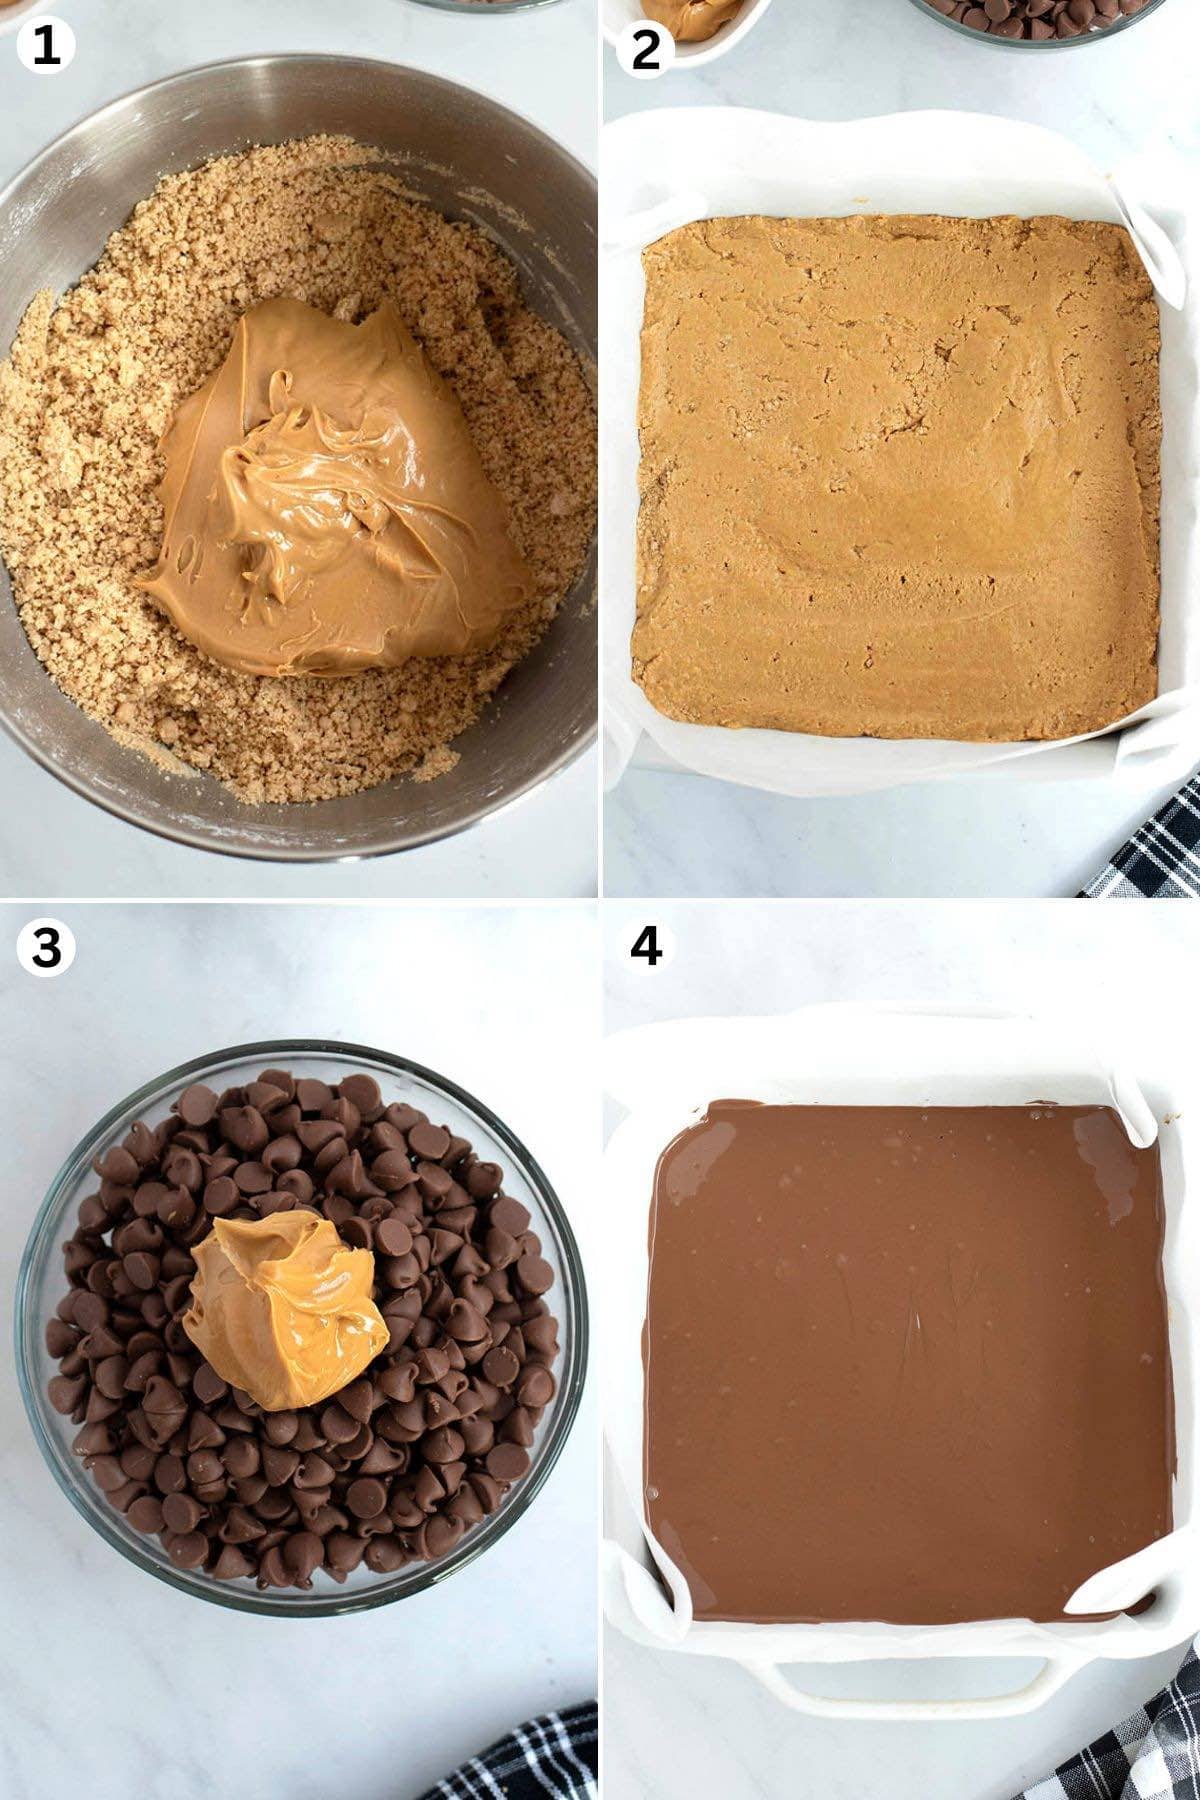 Combine melted butter, powdered sugar, and graham crackers. Mix in peanut butter. Spread peanut butter mixture into the bottom of the dish. Add chocolate chips and remaining peanut butter and melt in the microwave.  Spread chocolate mixture over peanut butter in dish.